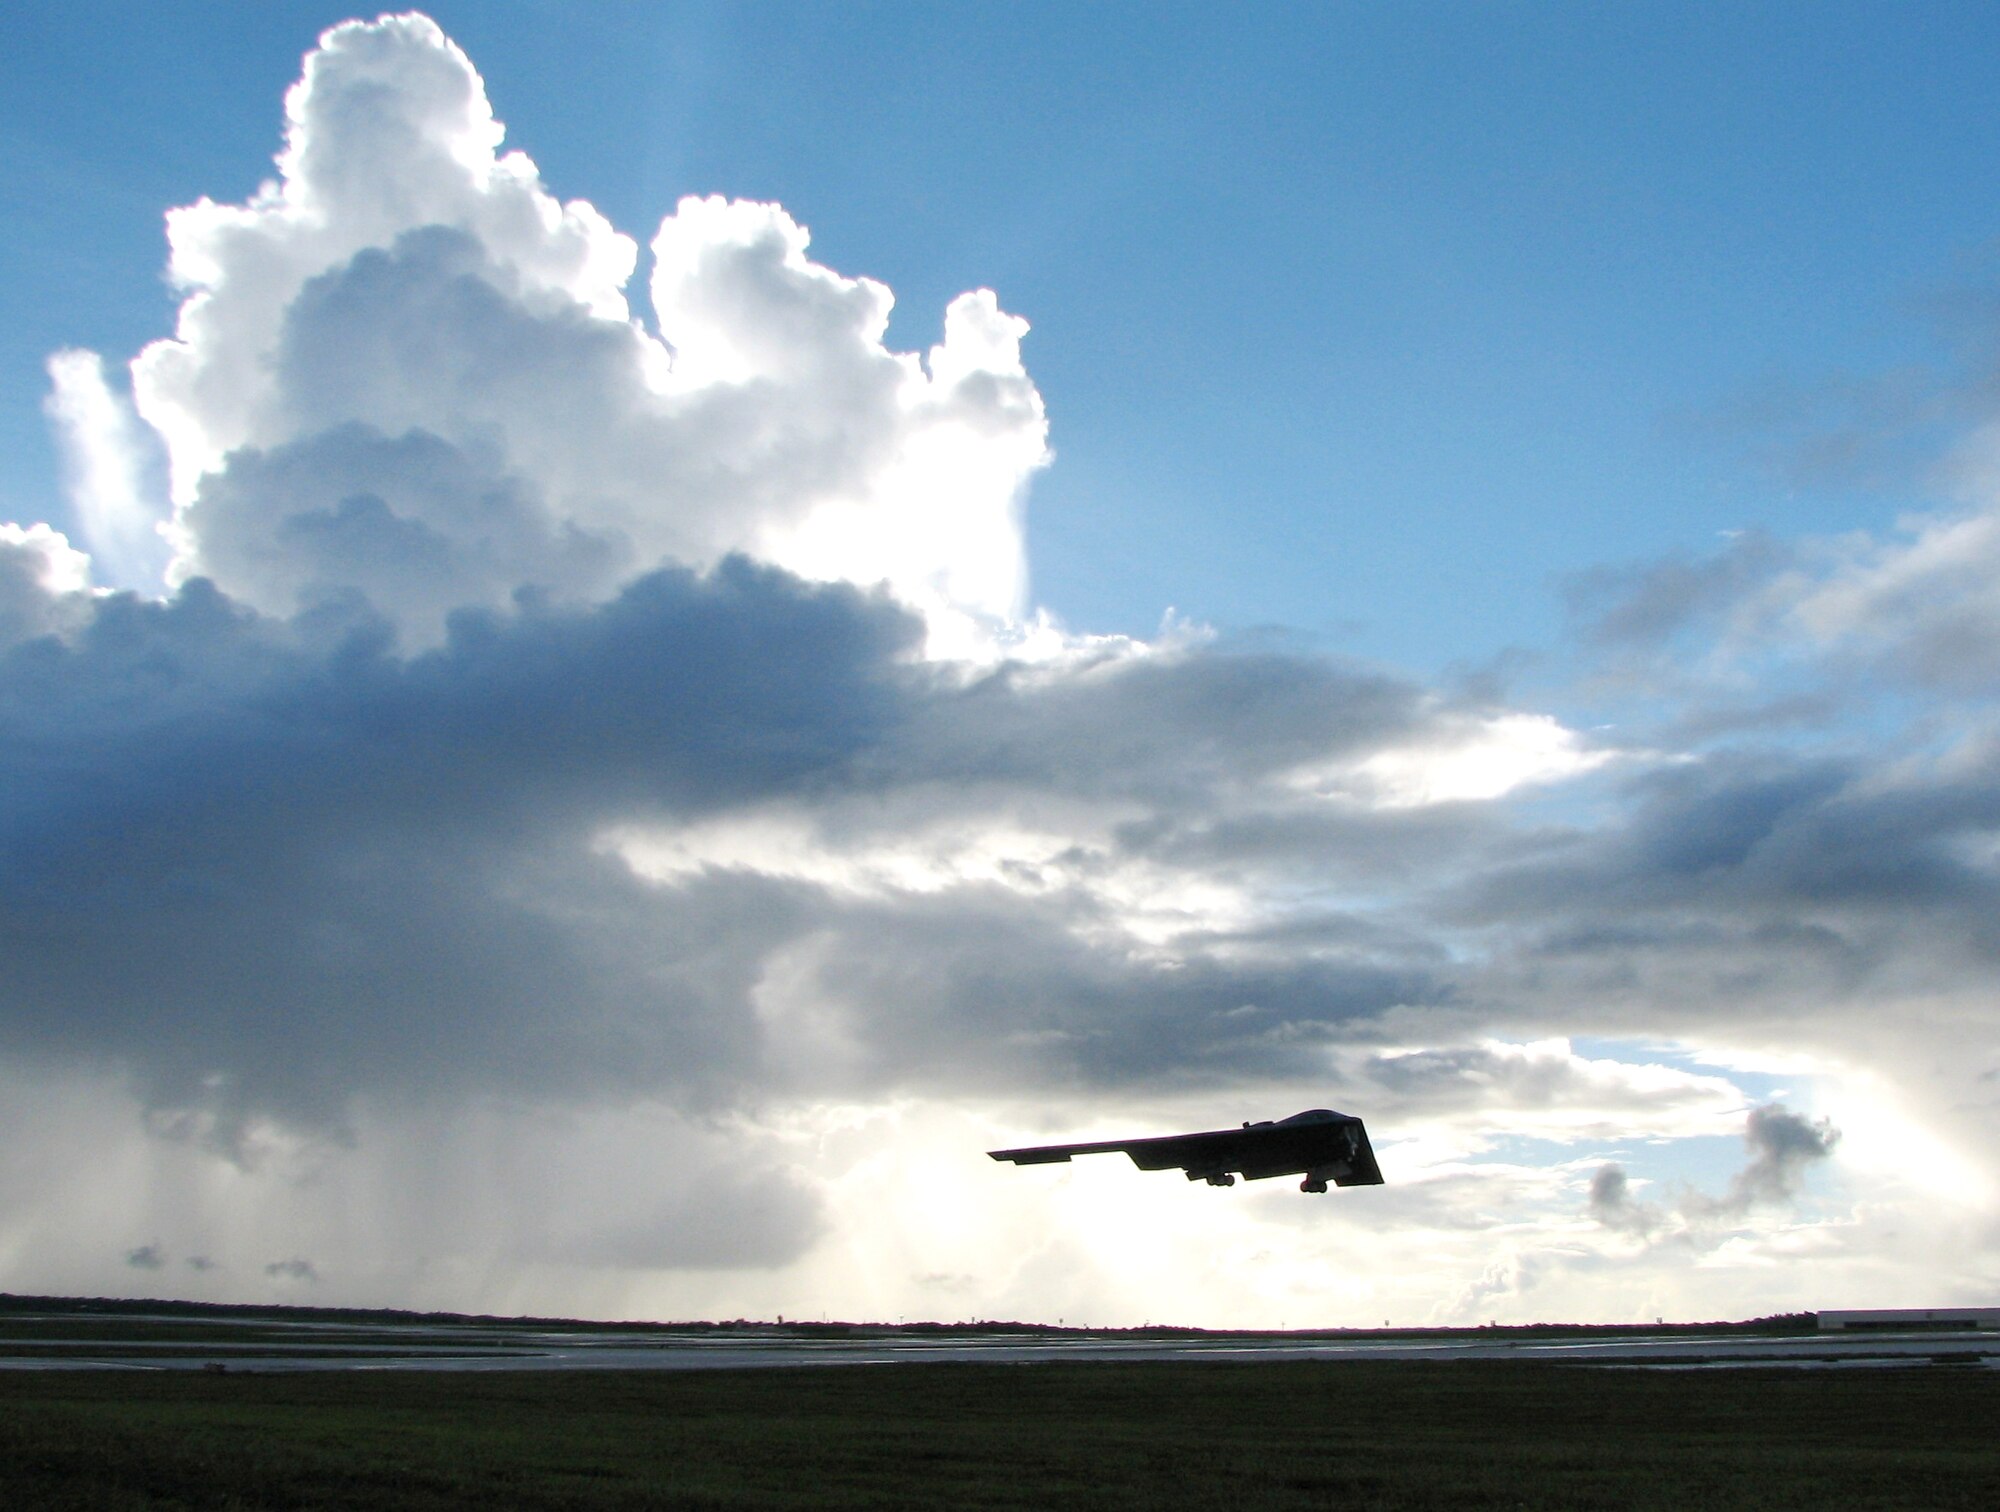 A B-2 Spirit from the 13th Expeditionary Bomb Squadron departs on a training mission during one of the final sorties of a four-month deployment to Andersen Air Force Base, Guam, Aug. 24. The 13th and 393rd EBS flew more than 140 sorties and released more than 330 weapons during the deployment. B-2 aircraft, pilots, maintainers and support staff deployed from the 509th Bomb Wing at Whiteman AFB, Mo. (U.S. Air Force photo/Tech. Sgt. Mikal Canfield) 